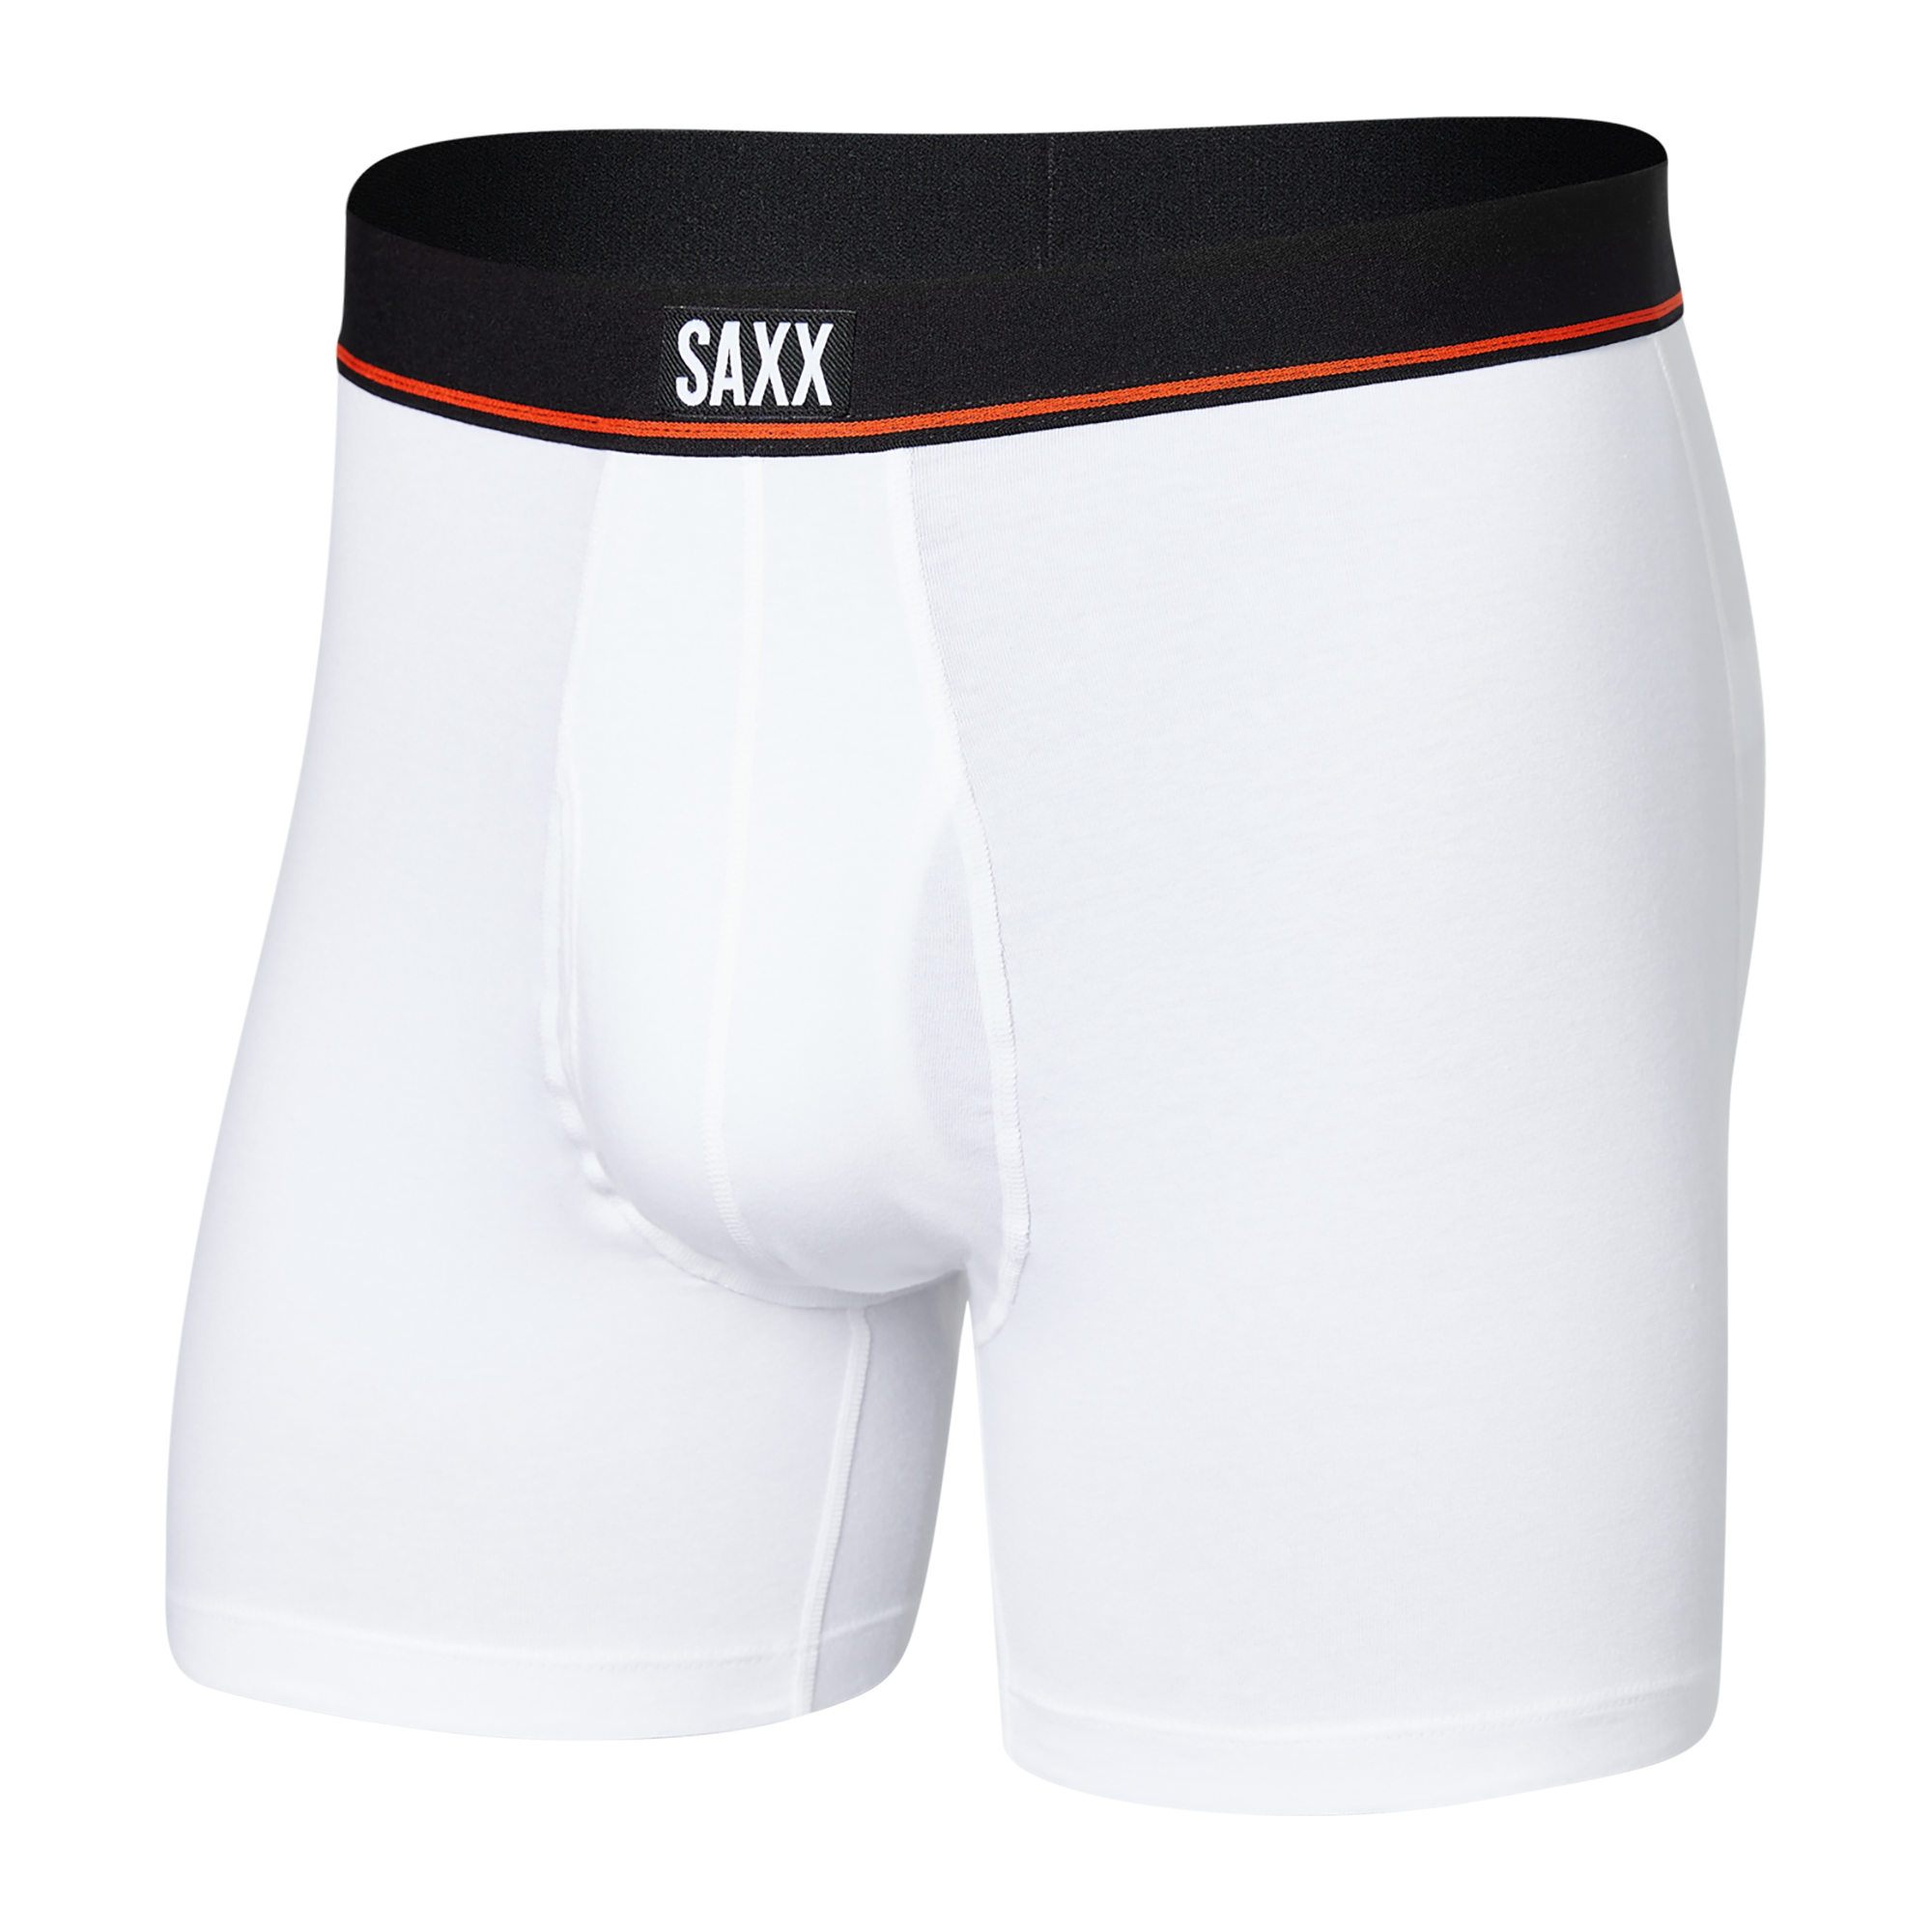  SAXX Men's Underwear - Non-Stop Stretch Cotton Trunk – Pack of  3 with Built-In Pouch Support and Fly – Soft, Breathable and Moisture  Wicking, Black/Deep Navy/White, Small : Clothing, Shoes 